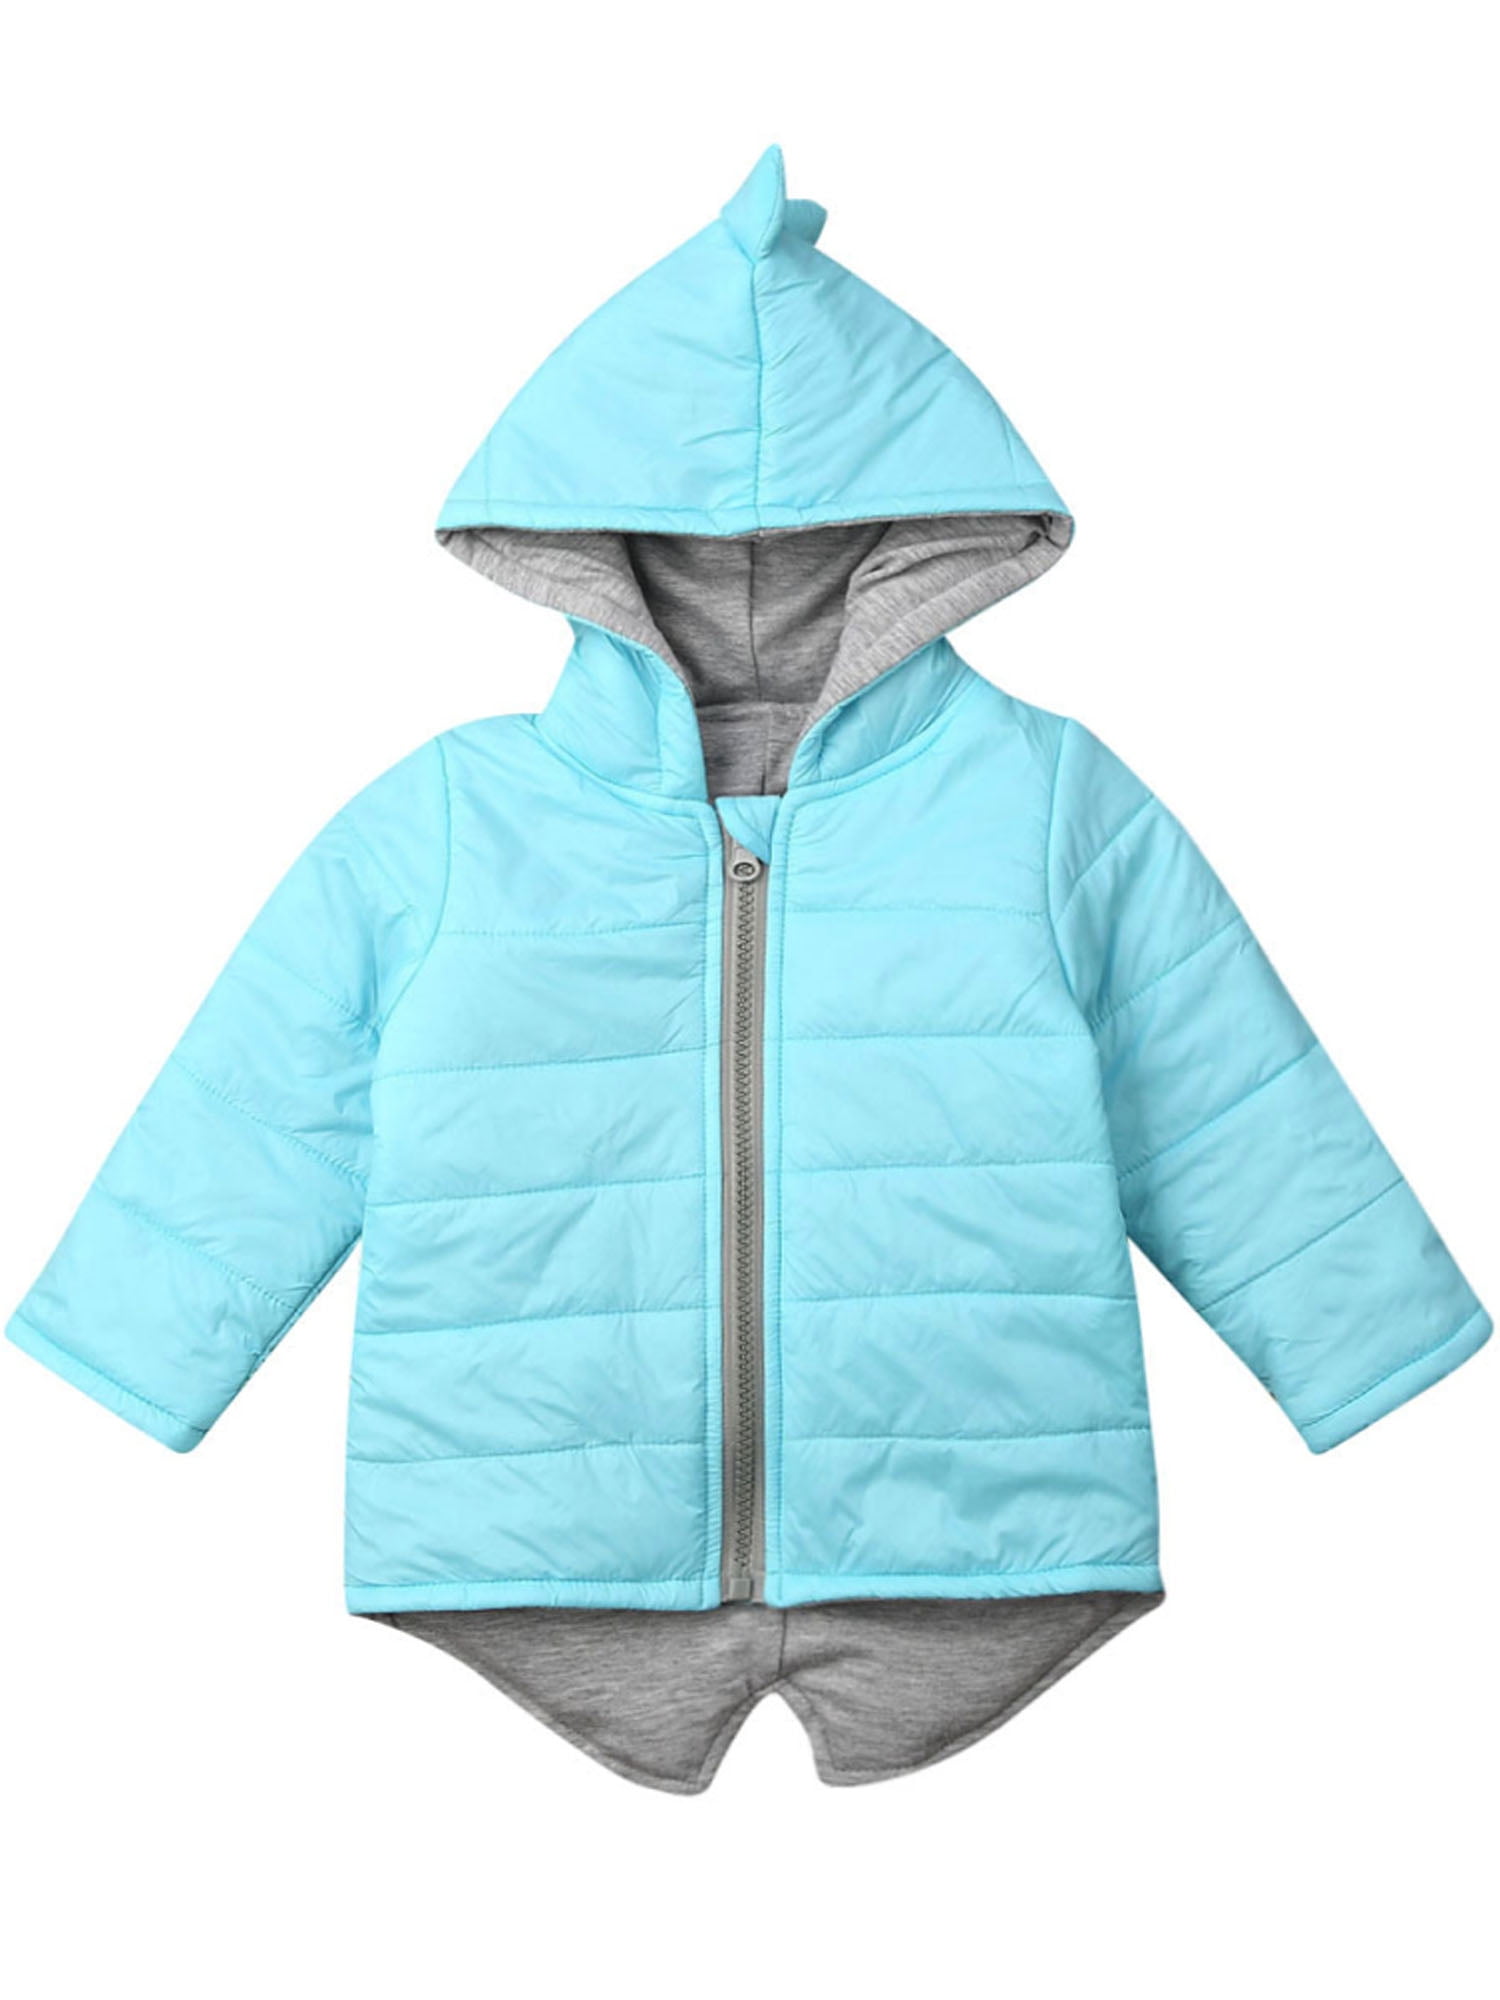 New Carter's Baby Girls Baby Boys Hooded Quilted Blue Jacket 3D Ears 